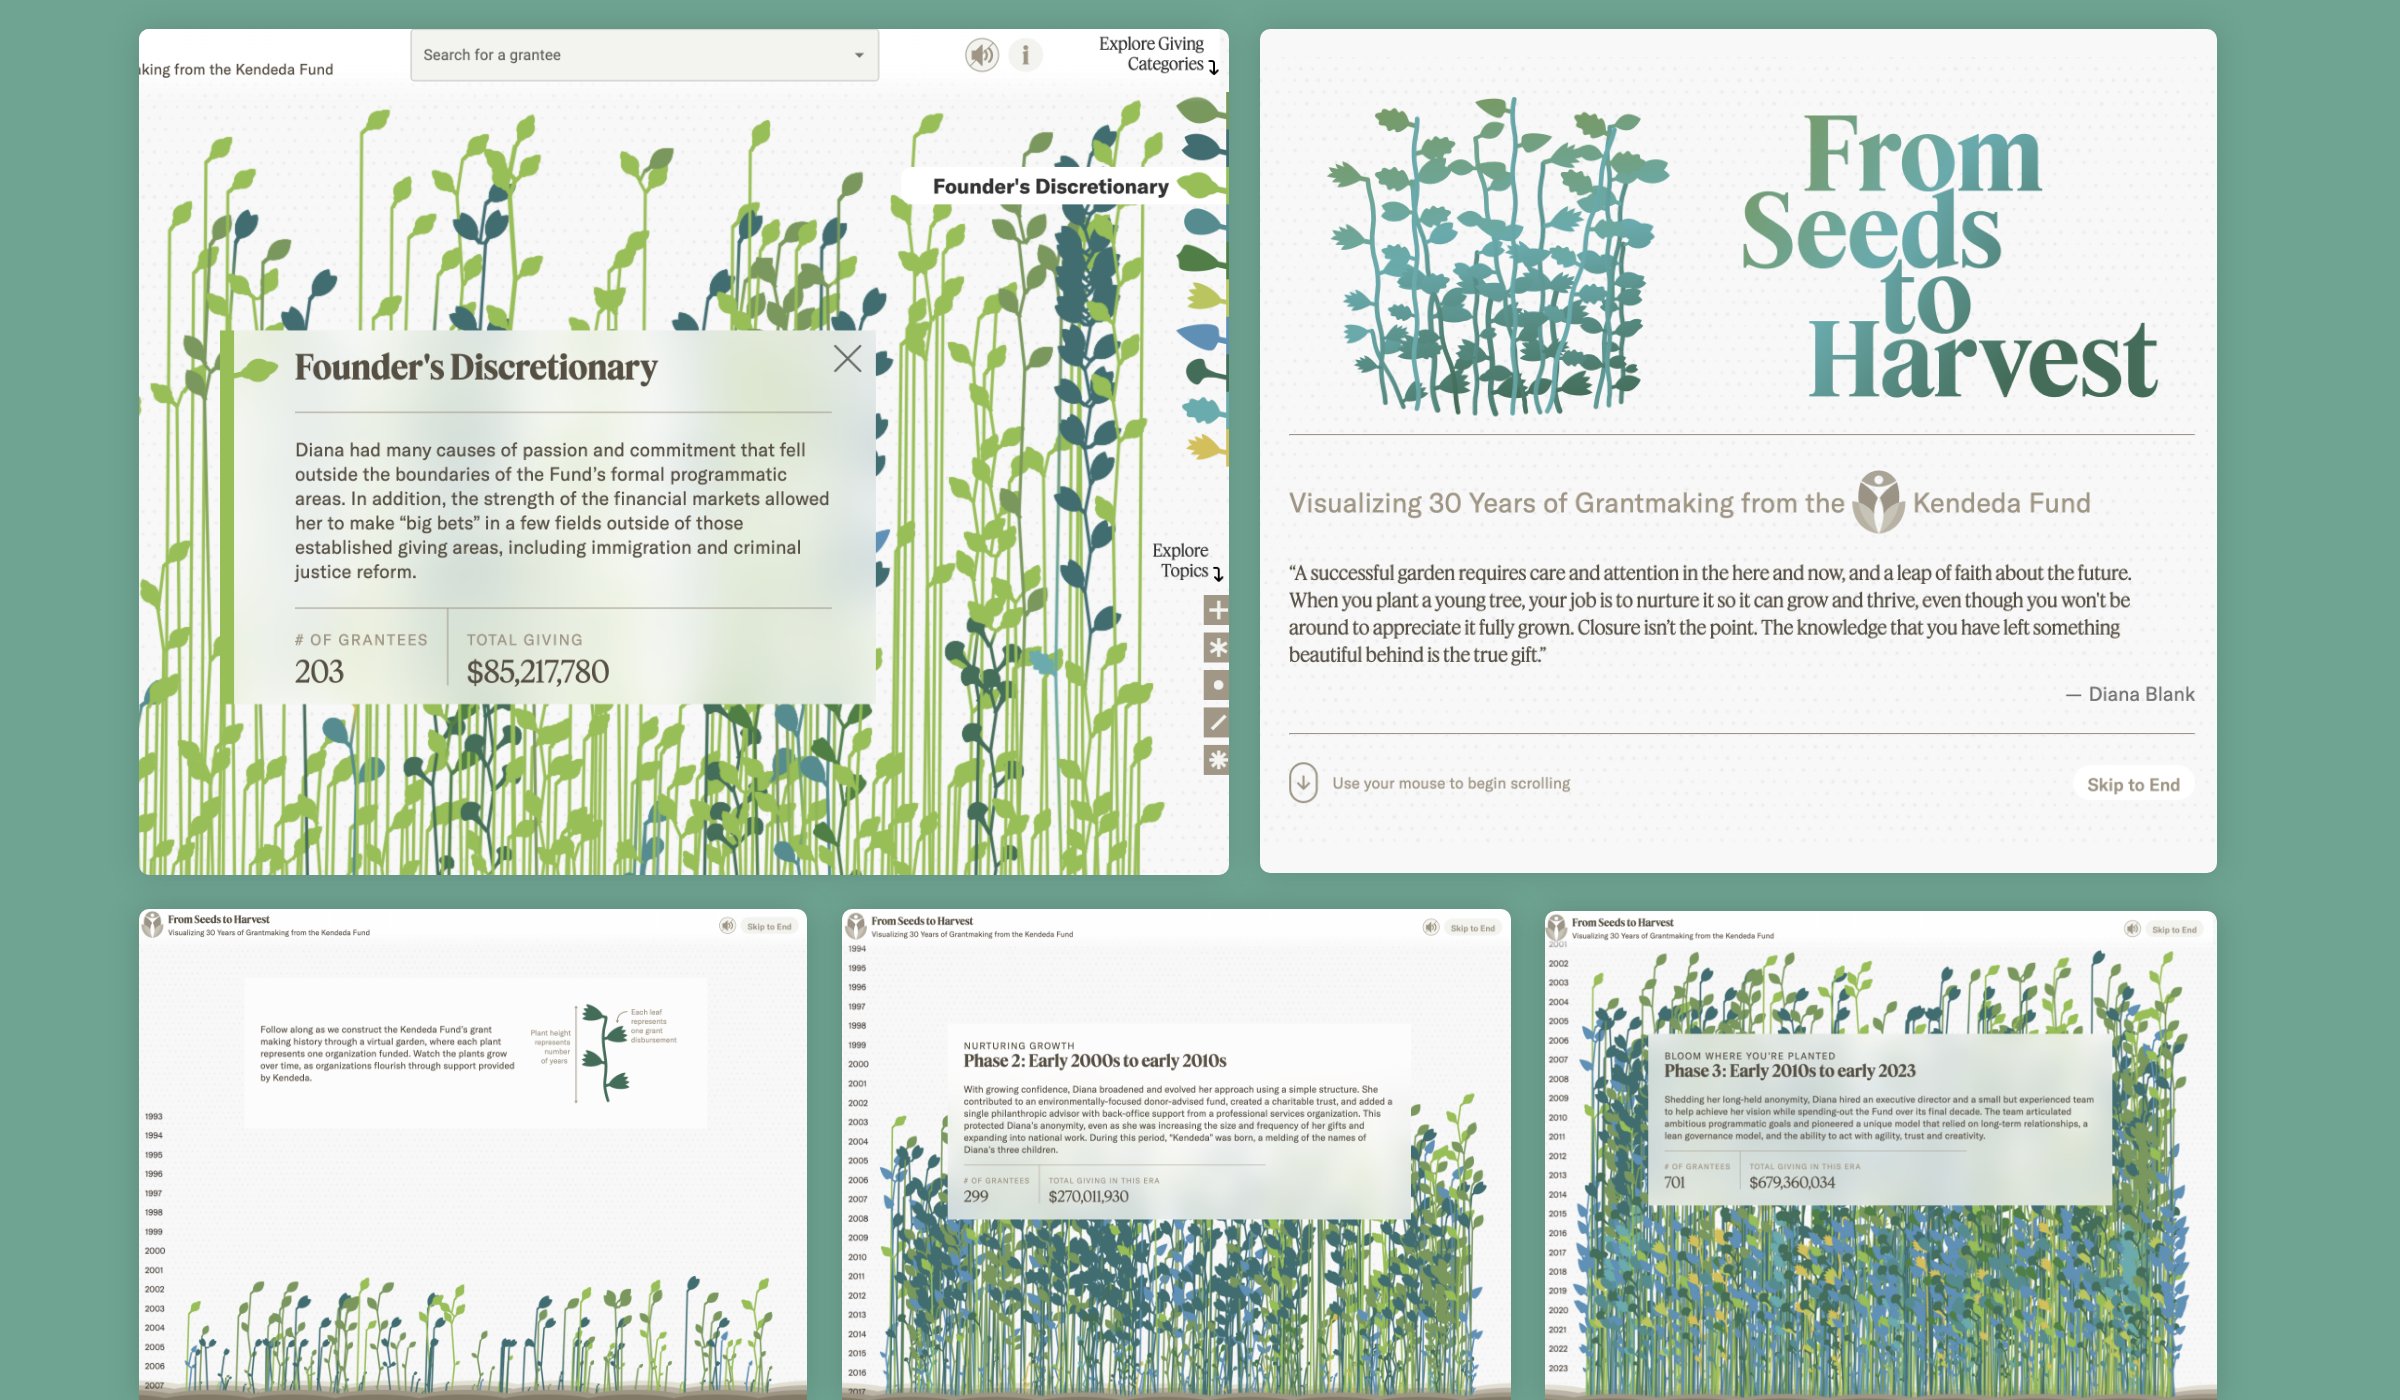 montage of images from the Virtual Garden project, designed by Graphicacy for the Kendeda fund